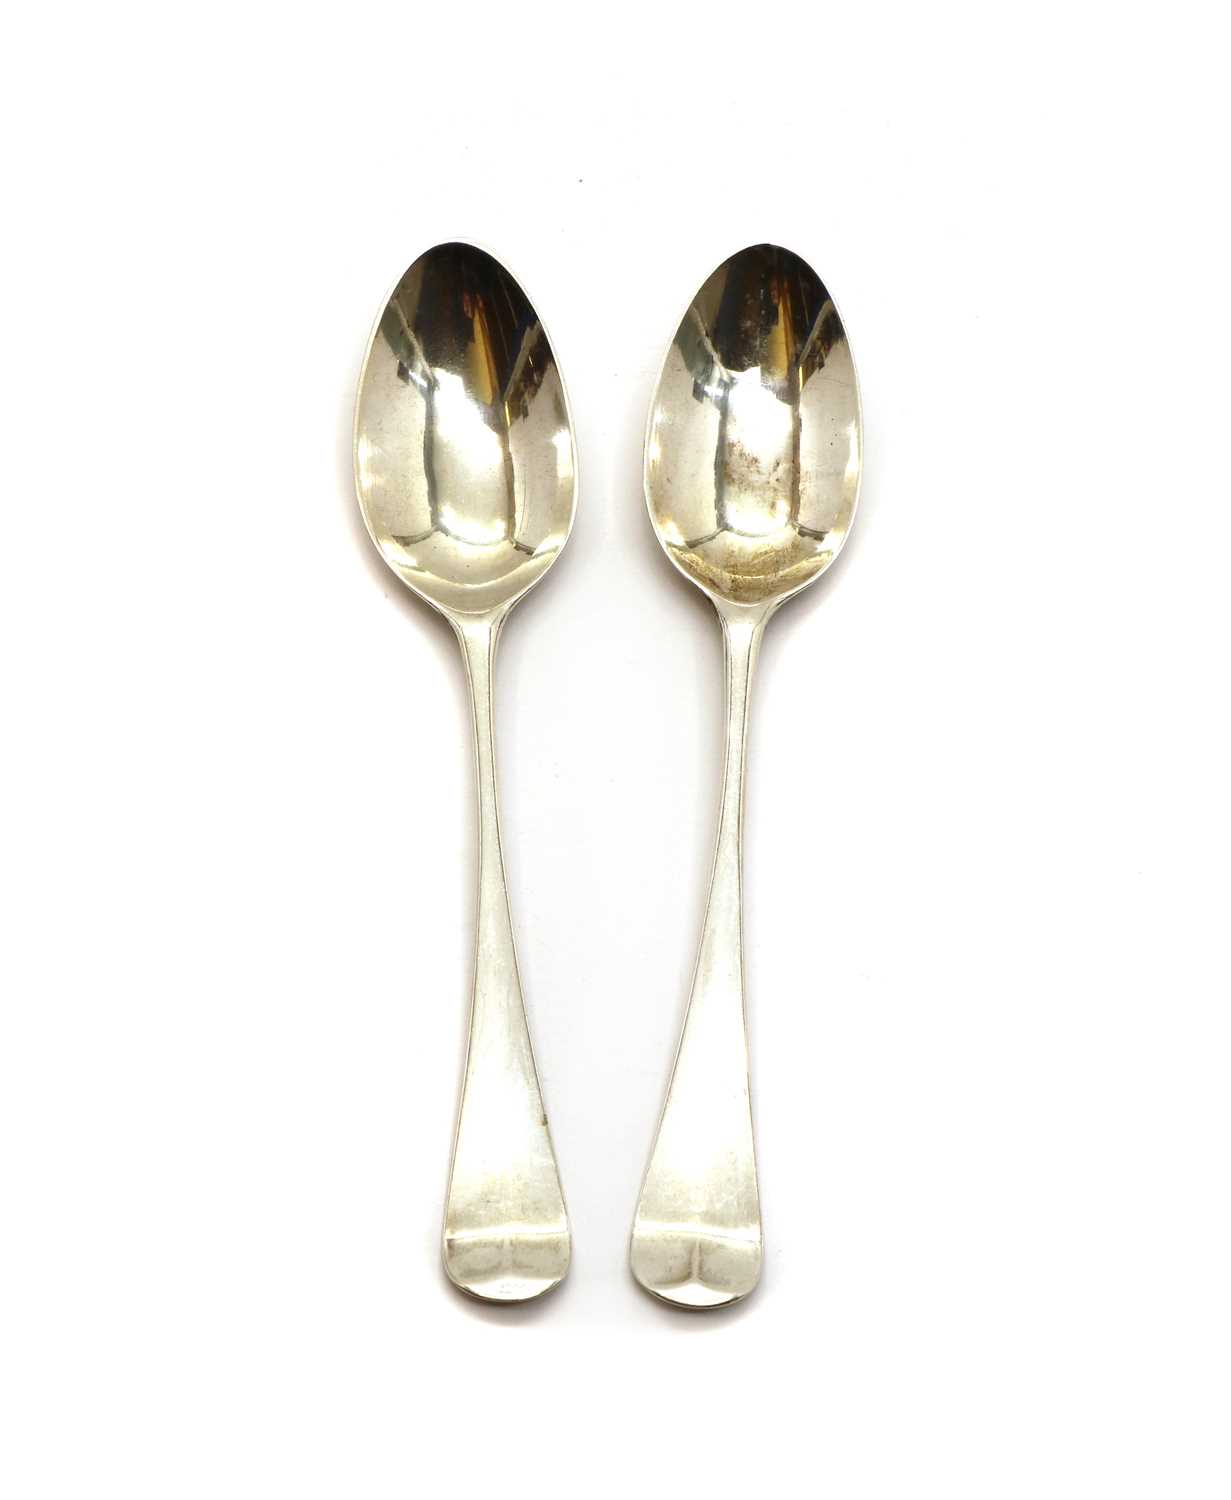 Lot 23 - Two 18th century silver teaspoons